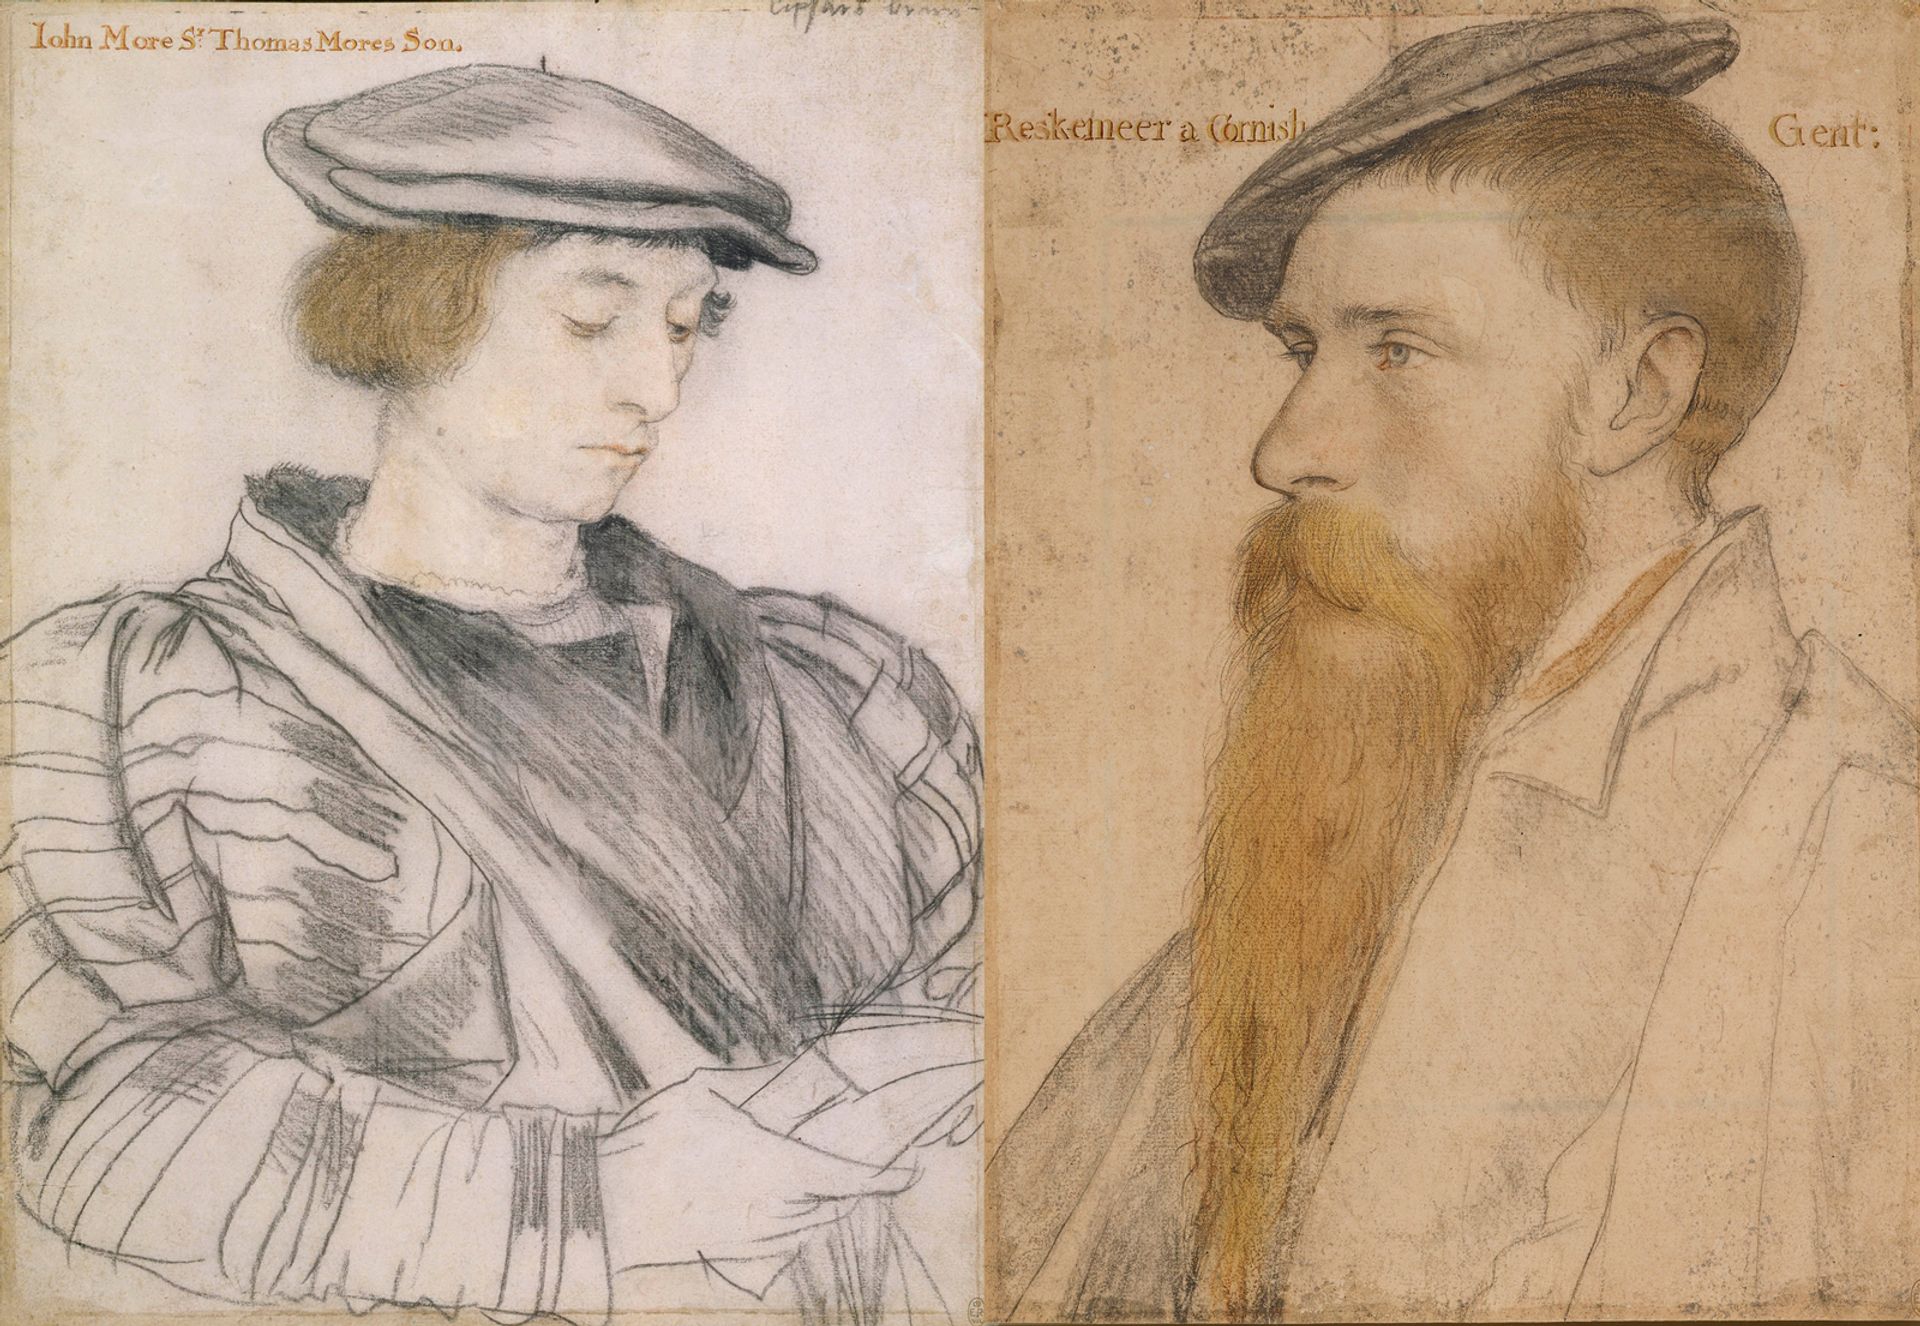 An indication that Charles II was his father’s son are these portraits of John More (around 1526-27) and William Reskimer (around 1532-34) by Hans Holbein the Younger.  Originally obtained by Henry VIII, they were sold by Charles I to finance his purchase of a Raphael, but were bought back by his son Royal Collection Trust; © Her Majesty Queen Elizabeth II, 2018